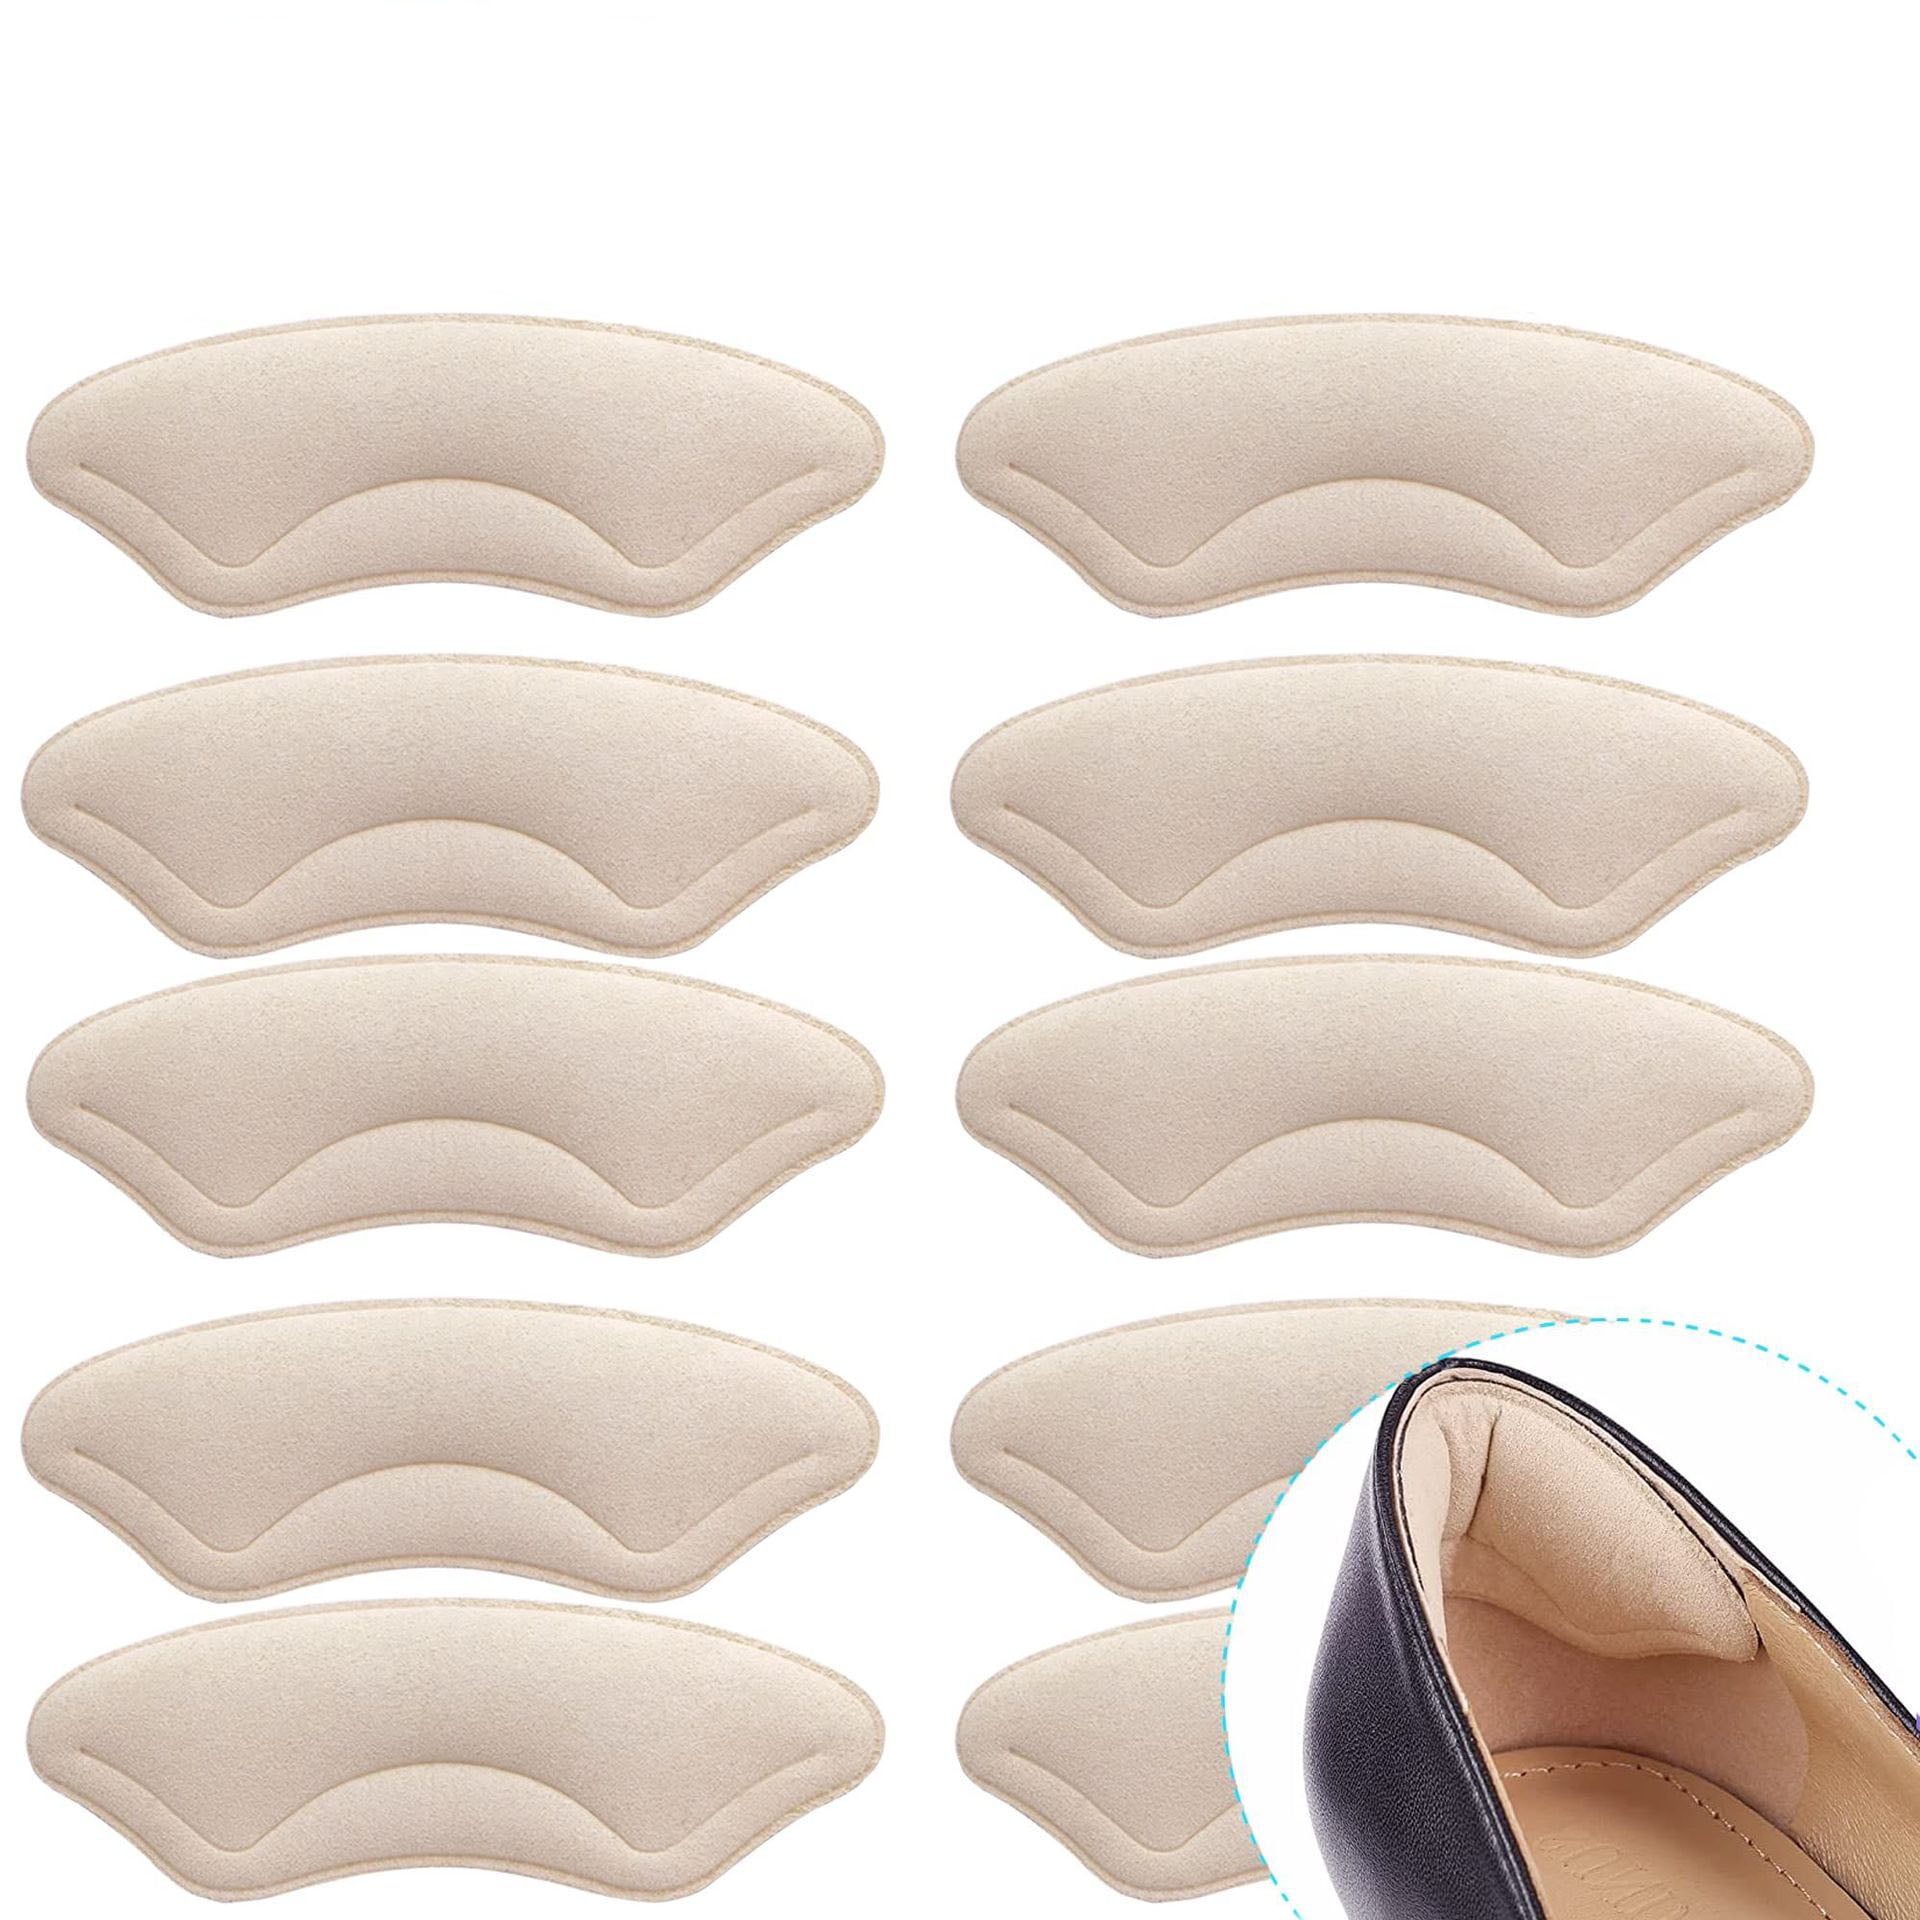 Heel Grips, VONTER High Heel Cushion Silicone Shoe Pads for Too Big Shoes  Anti-Slip Heel Grips Inserts Liners Foot Insoles for Women, Back of Heel  Protector - 5 Pairs - Walmart.com